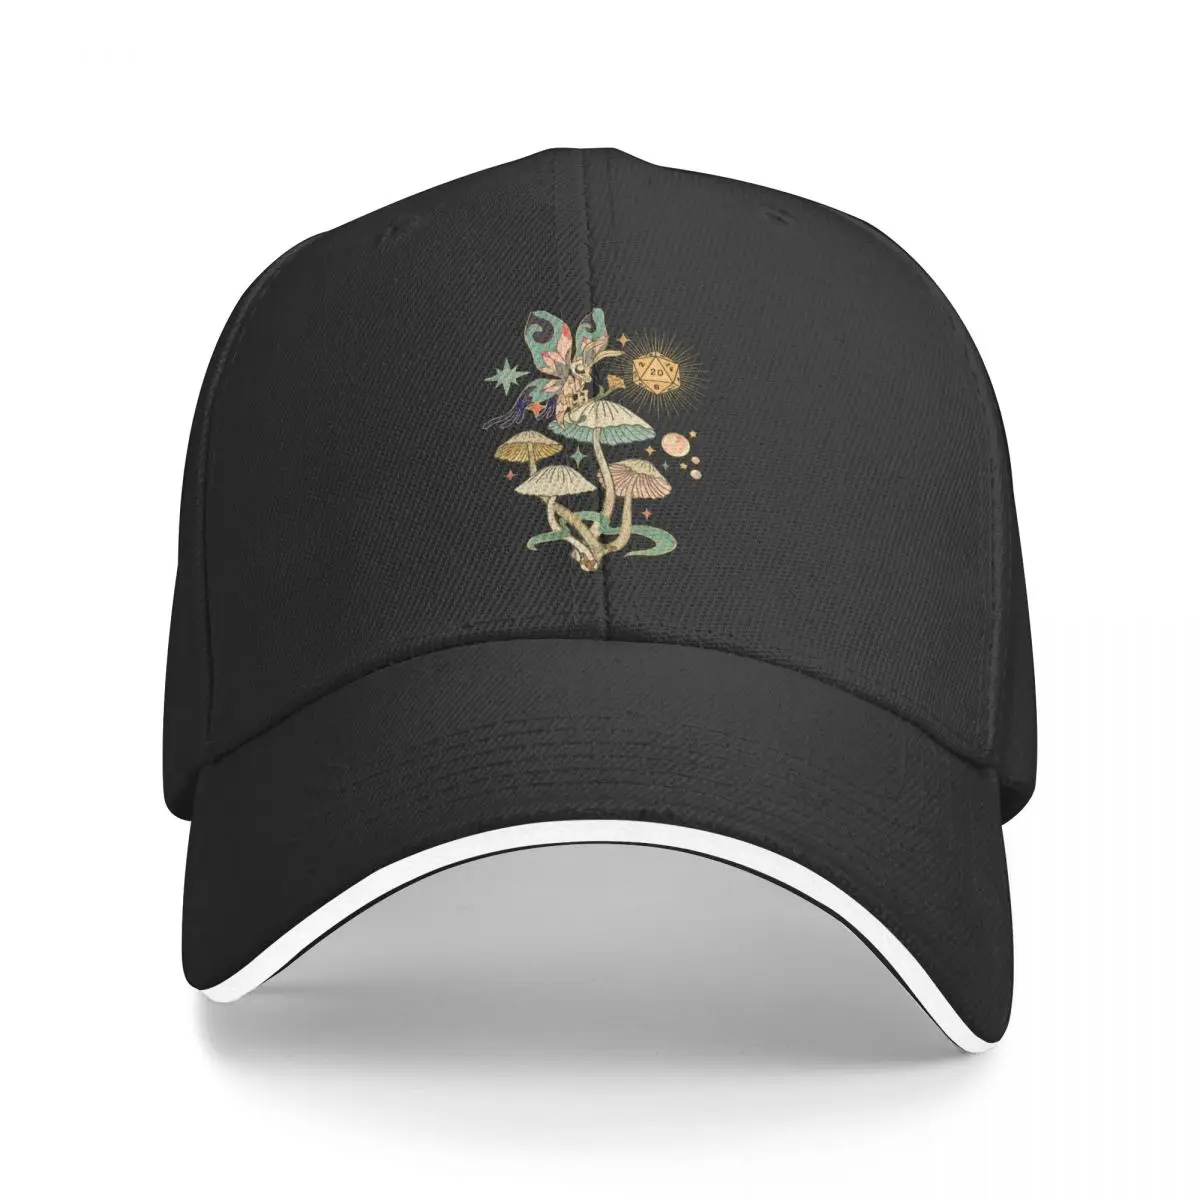 

DND Game D20 Dice With Magic Mushroom And Butterfly. Dad Hats Pure Color Women's Hat Cycling Baseball Caps Peaked Cap